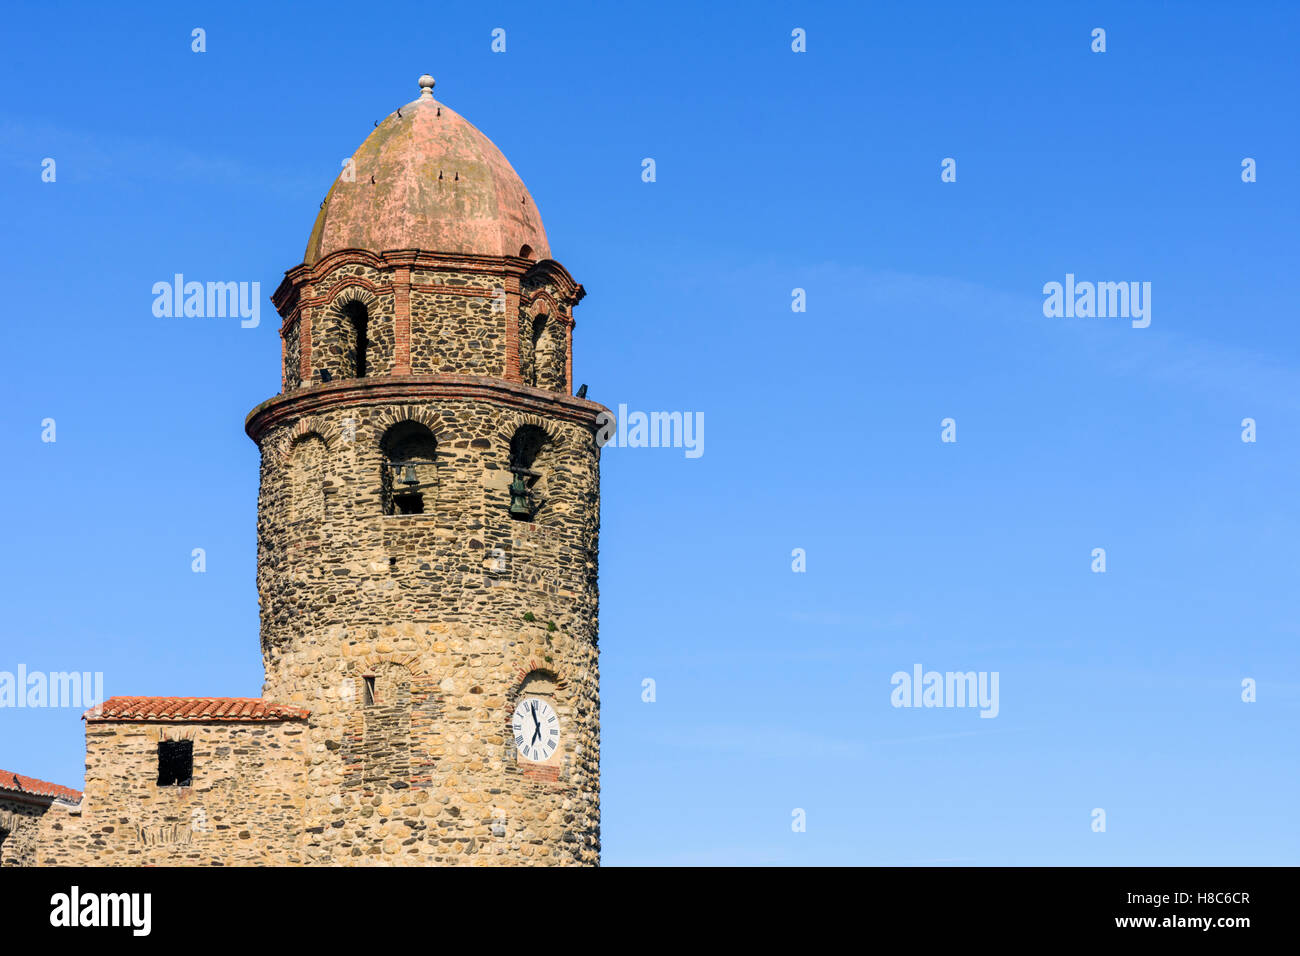 Collioure bell tower of the Church of Notre Dame des Anges, Collioure, Côte Vermeille, France Stock Photo